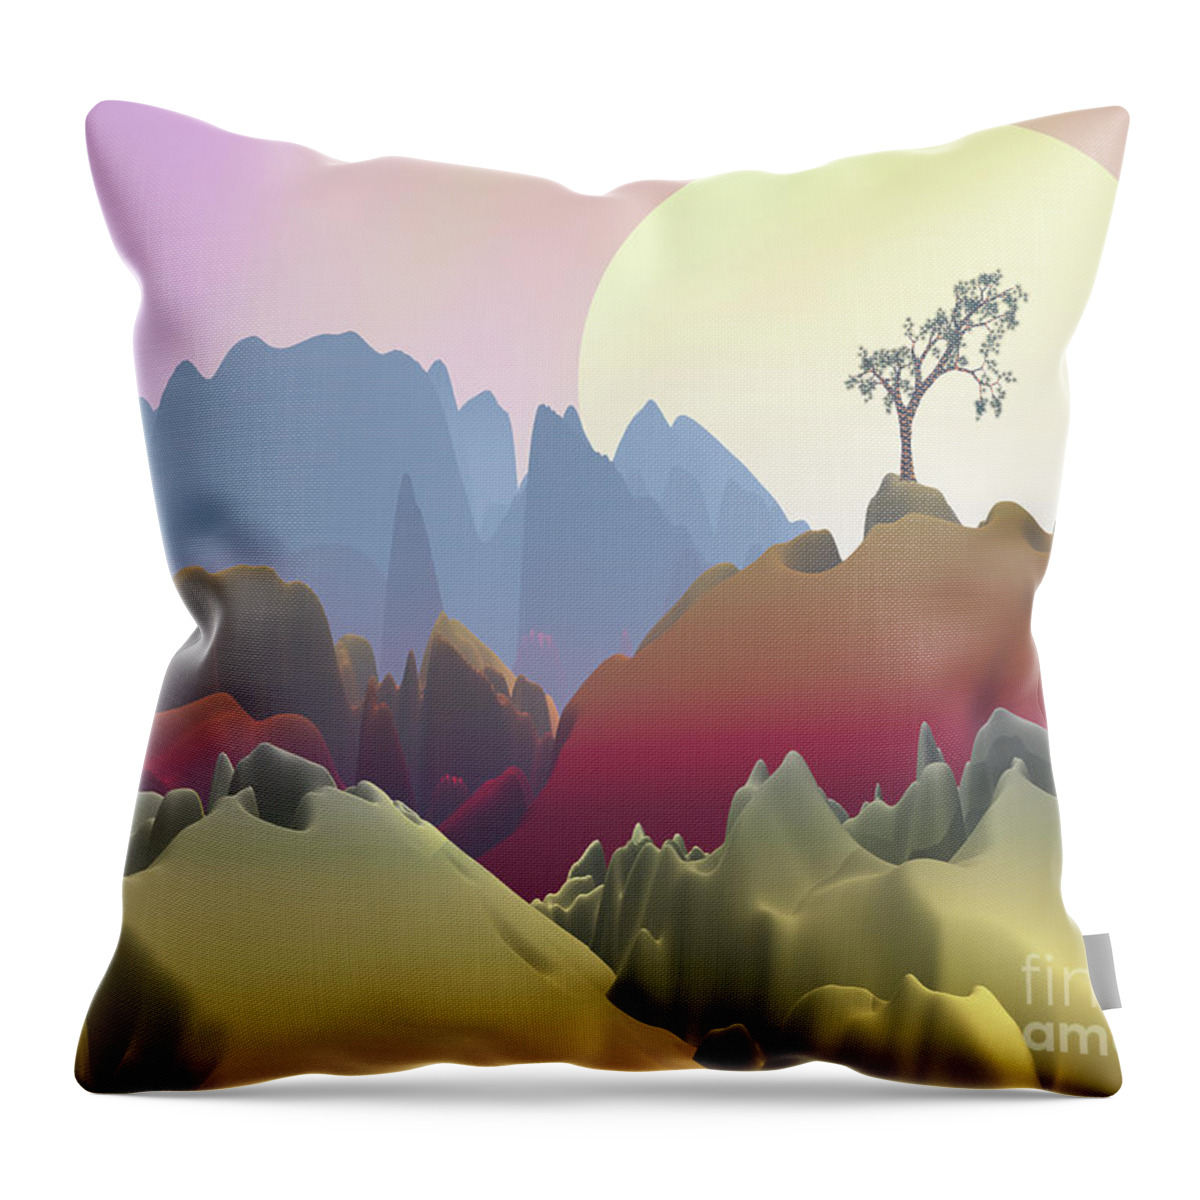 Fantasy Landscape Throw Pillow featuring the digital art Fantasy Mountain by Phil Perkins